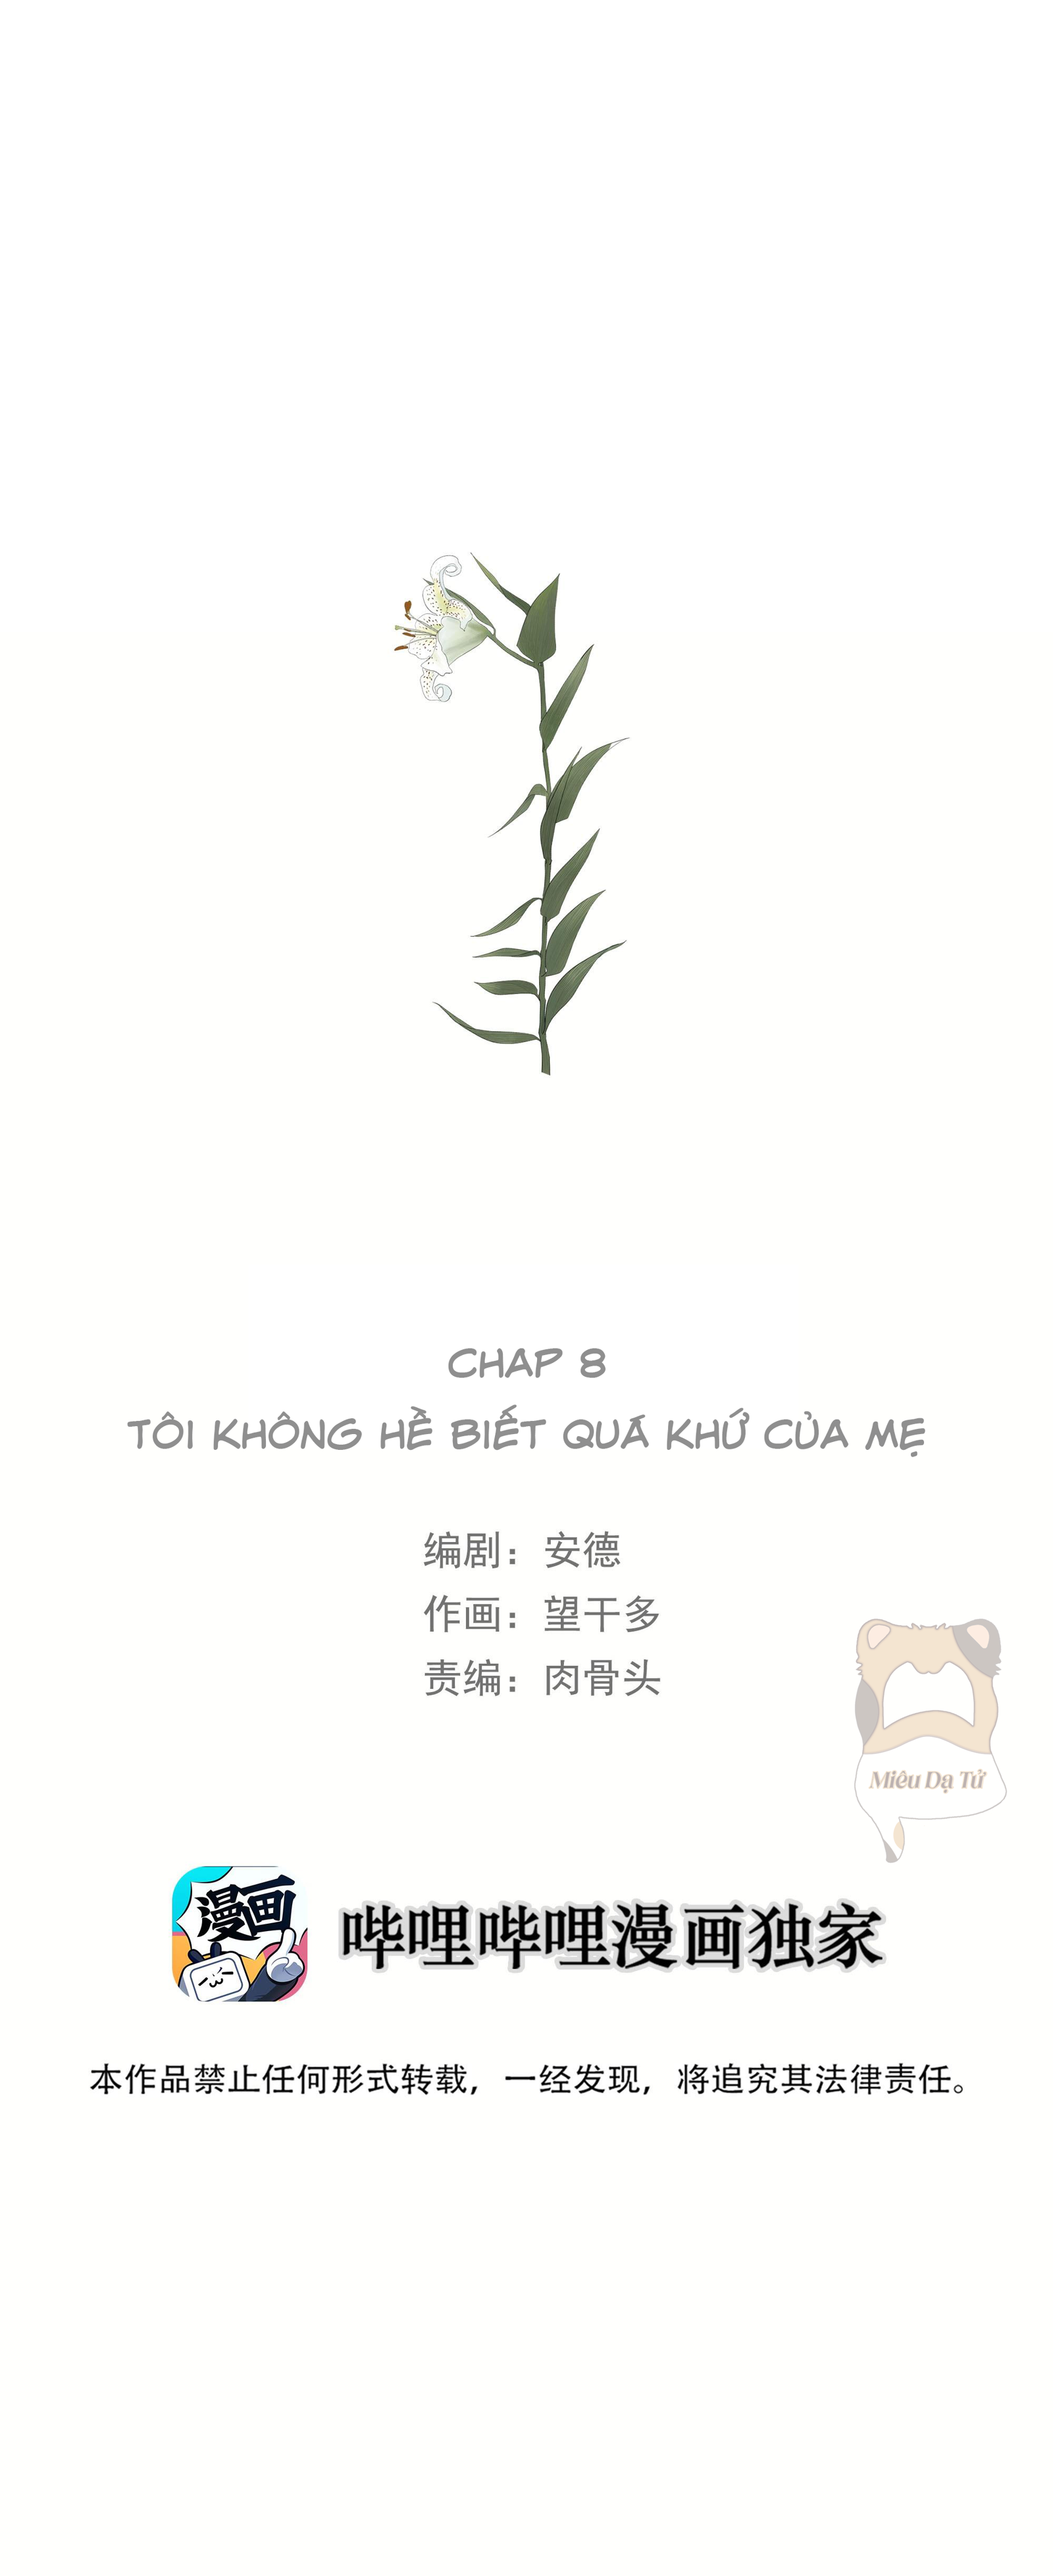 quy-co-ta-anh-chap-8-0